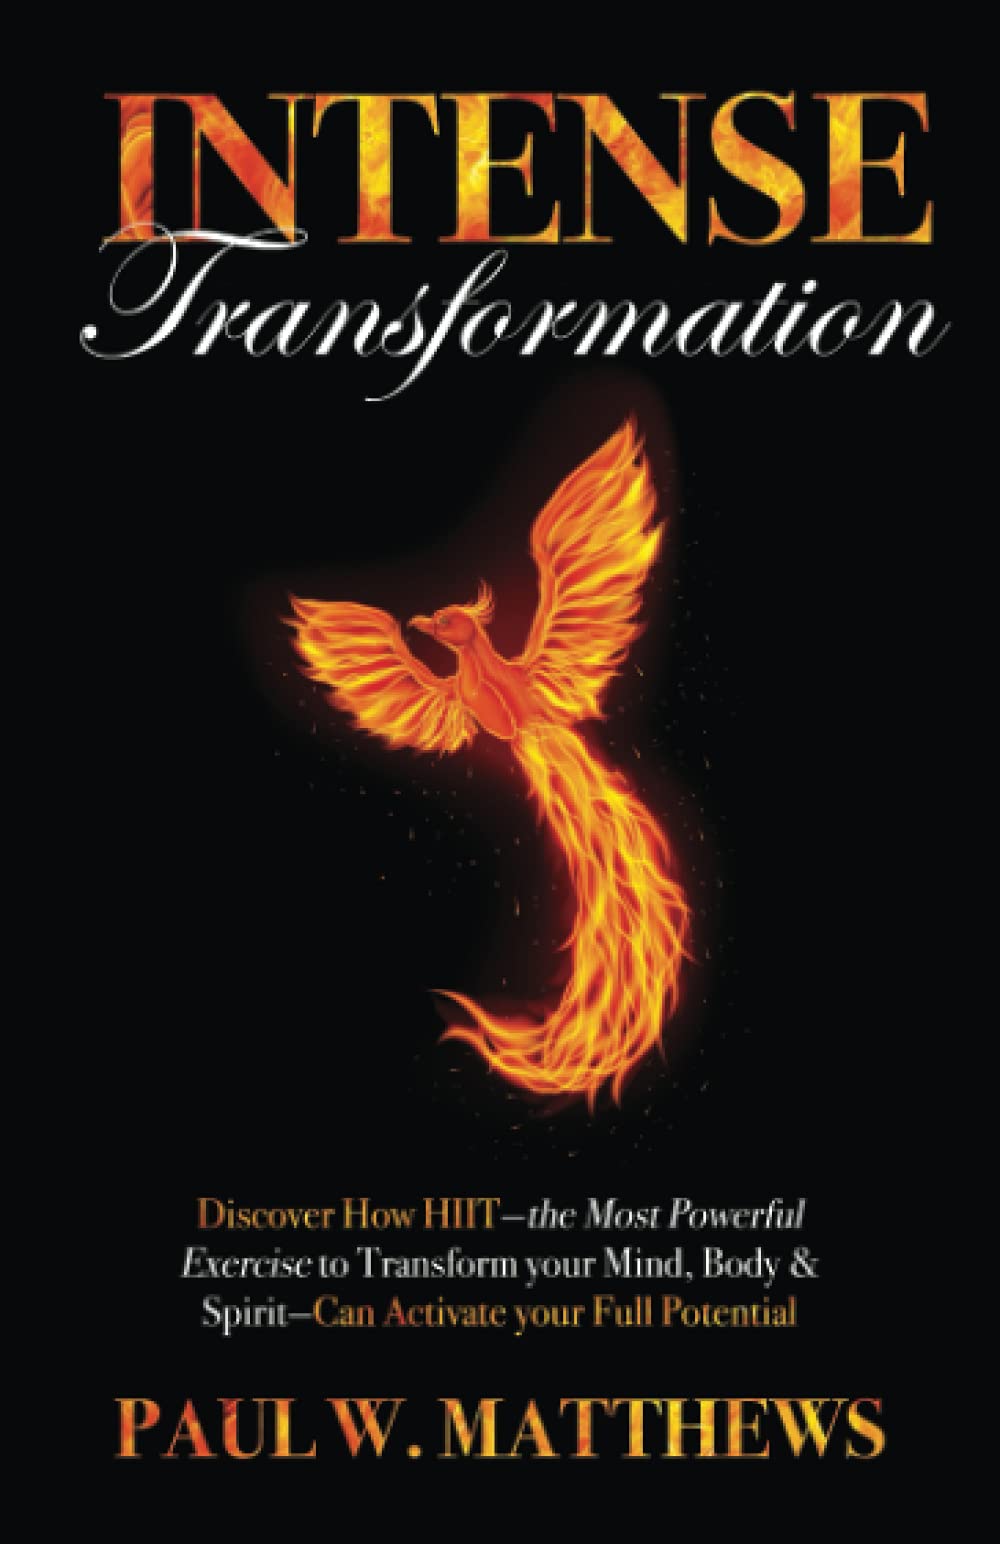 Intense Transformation: Discover How HIIT—the Most Powerful Exercise to Transform Your Mind, Body, & Spirit—Can Activate Your Full Potential